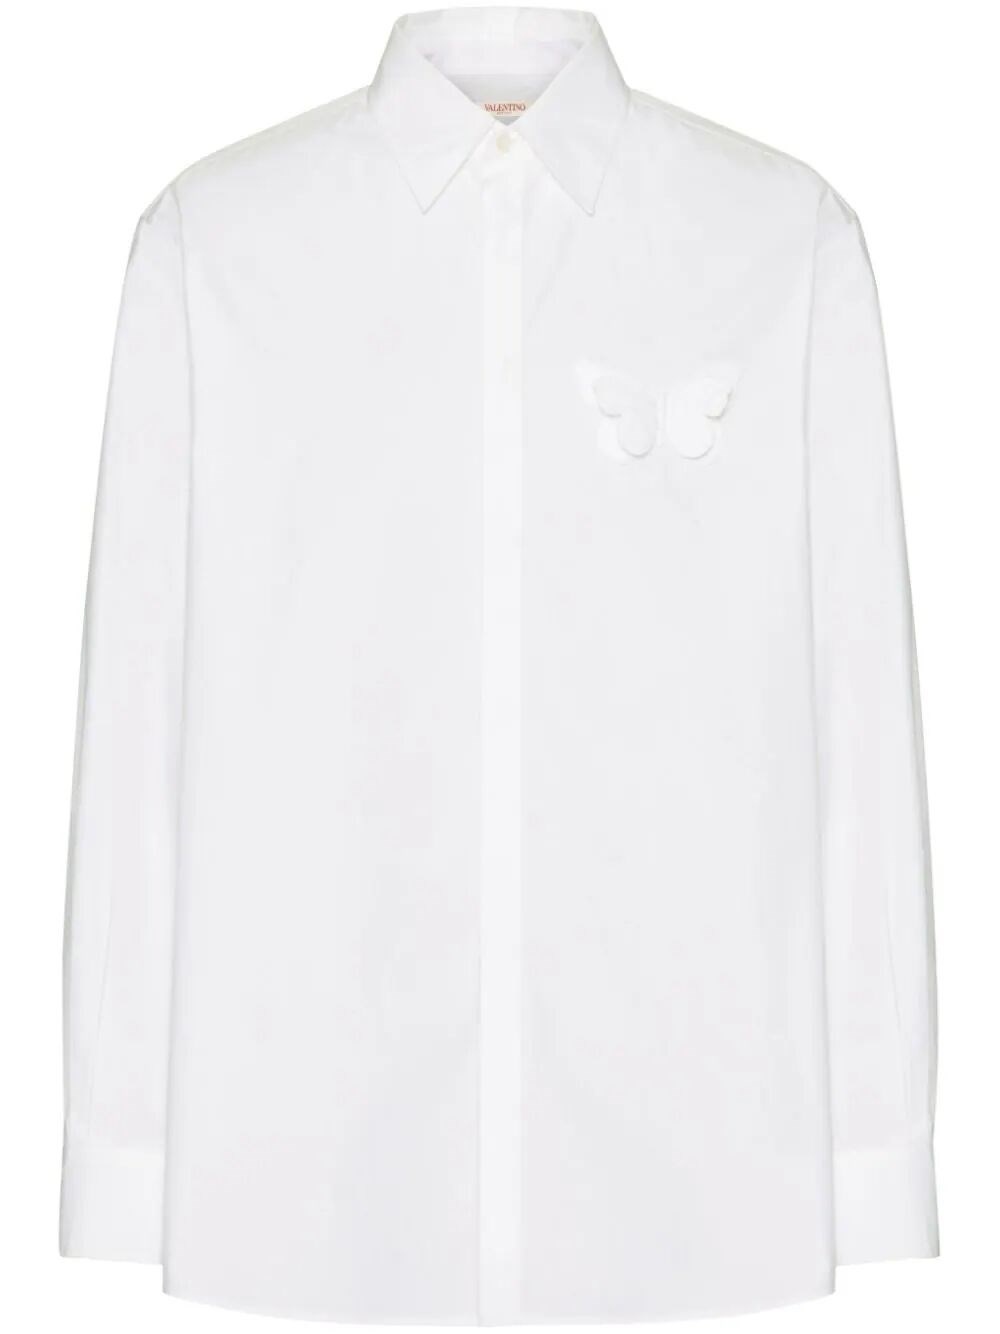 `Butterfly Embroideries` Shirt - 1